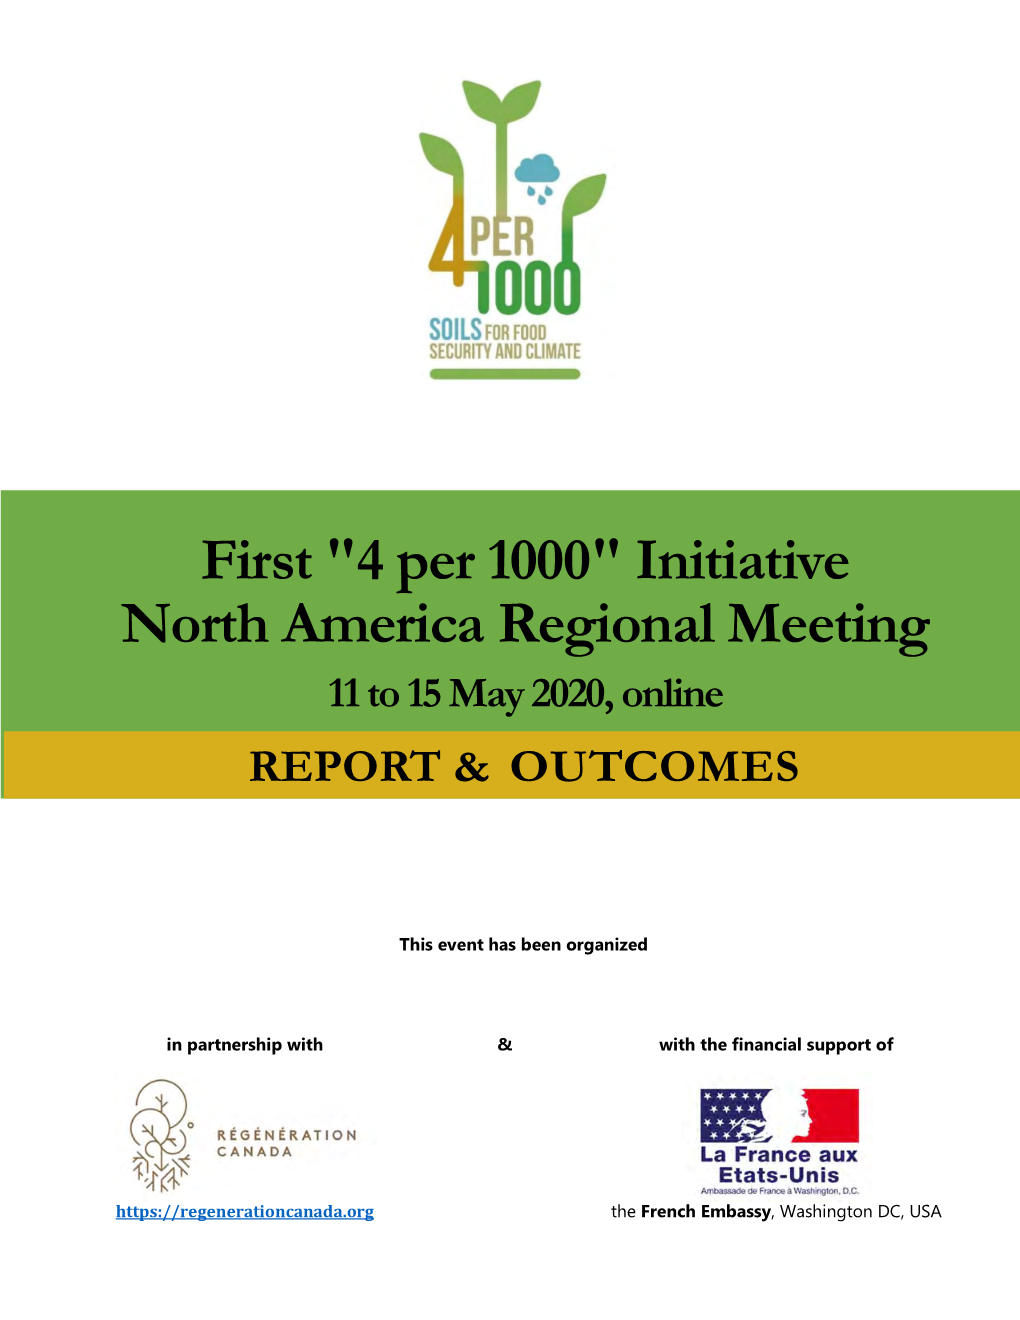 First "4 Per 1000" Initiative North America Regional Meeting 11 to 15 May 2020, Online